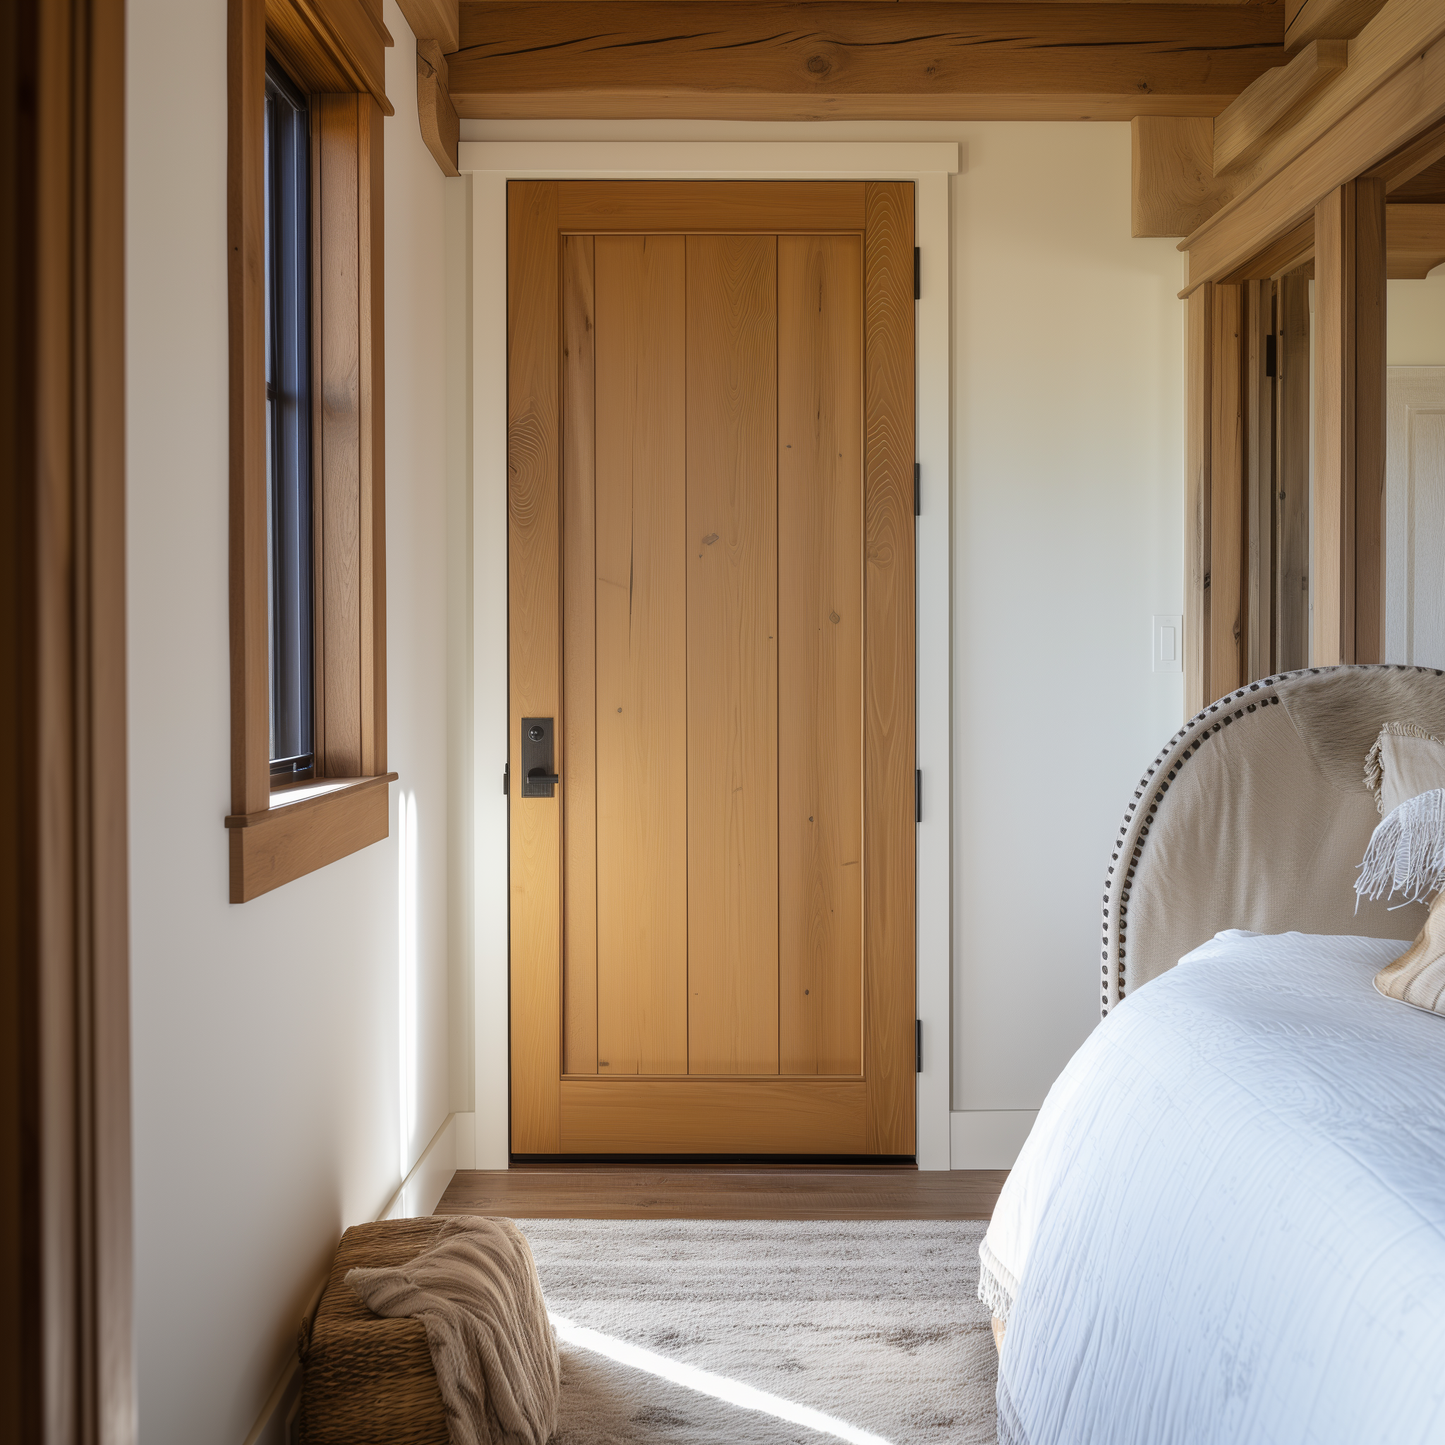 solid white oak interior door, bespoke fully customizable and custom built to order handcrafted from solid white oak. Pictured in an all white rustic bedroom with exposed beams and vintage vibe